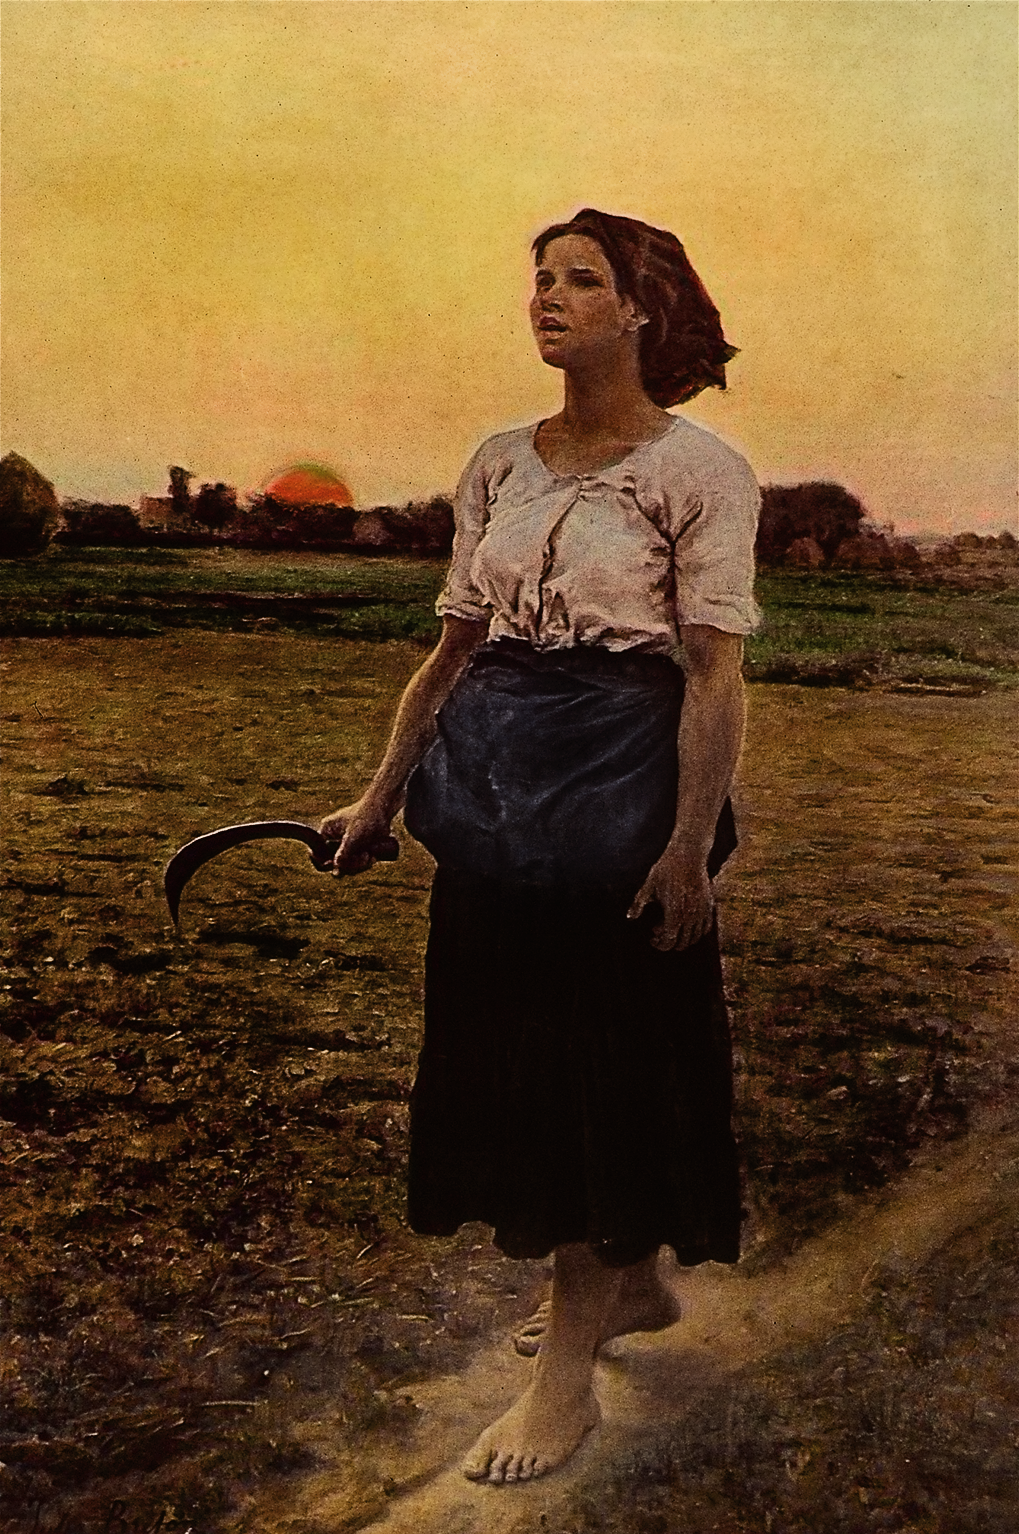 images/Song_of_the_Lark_-_Jules_Breton.png